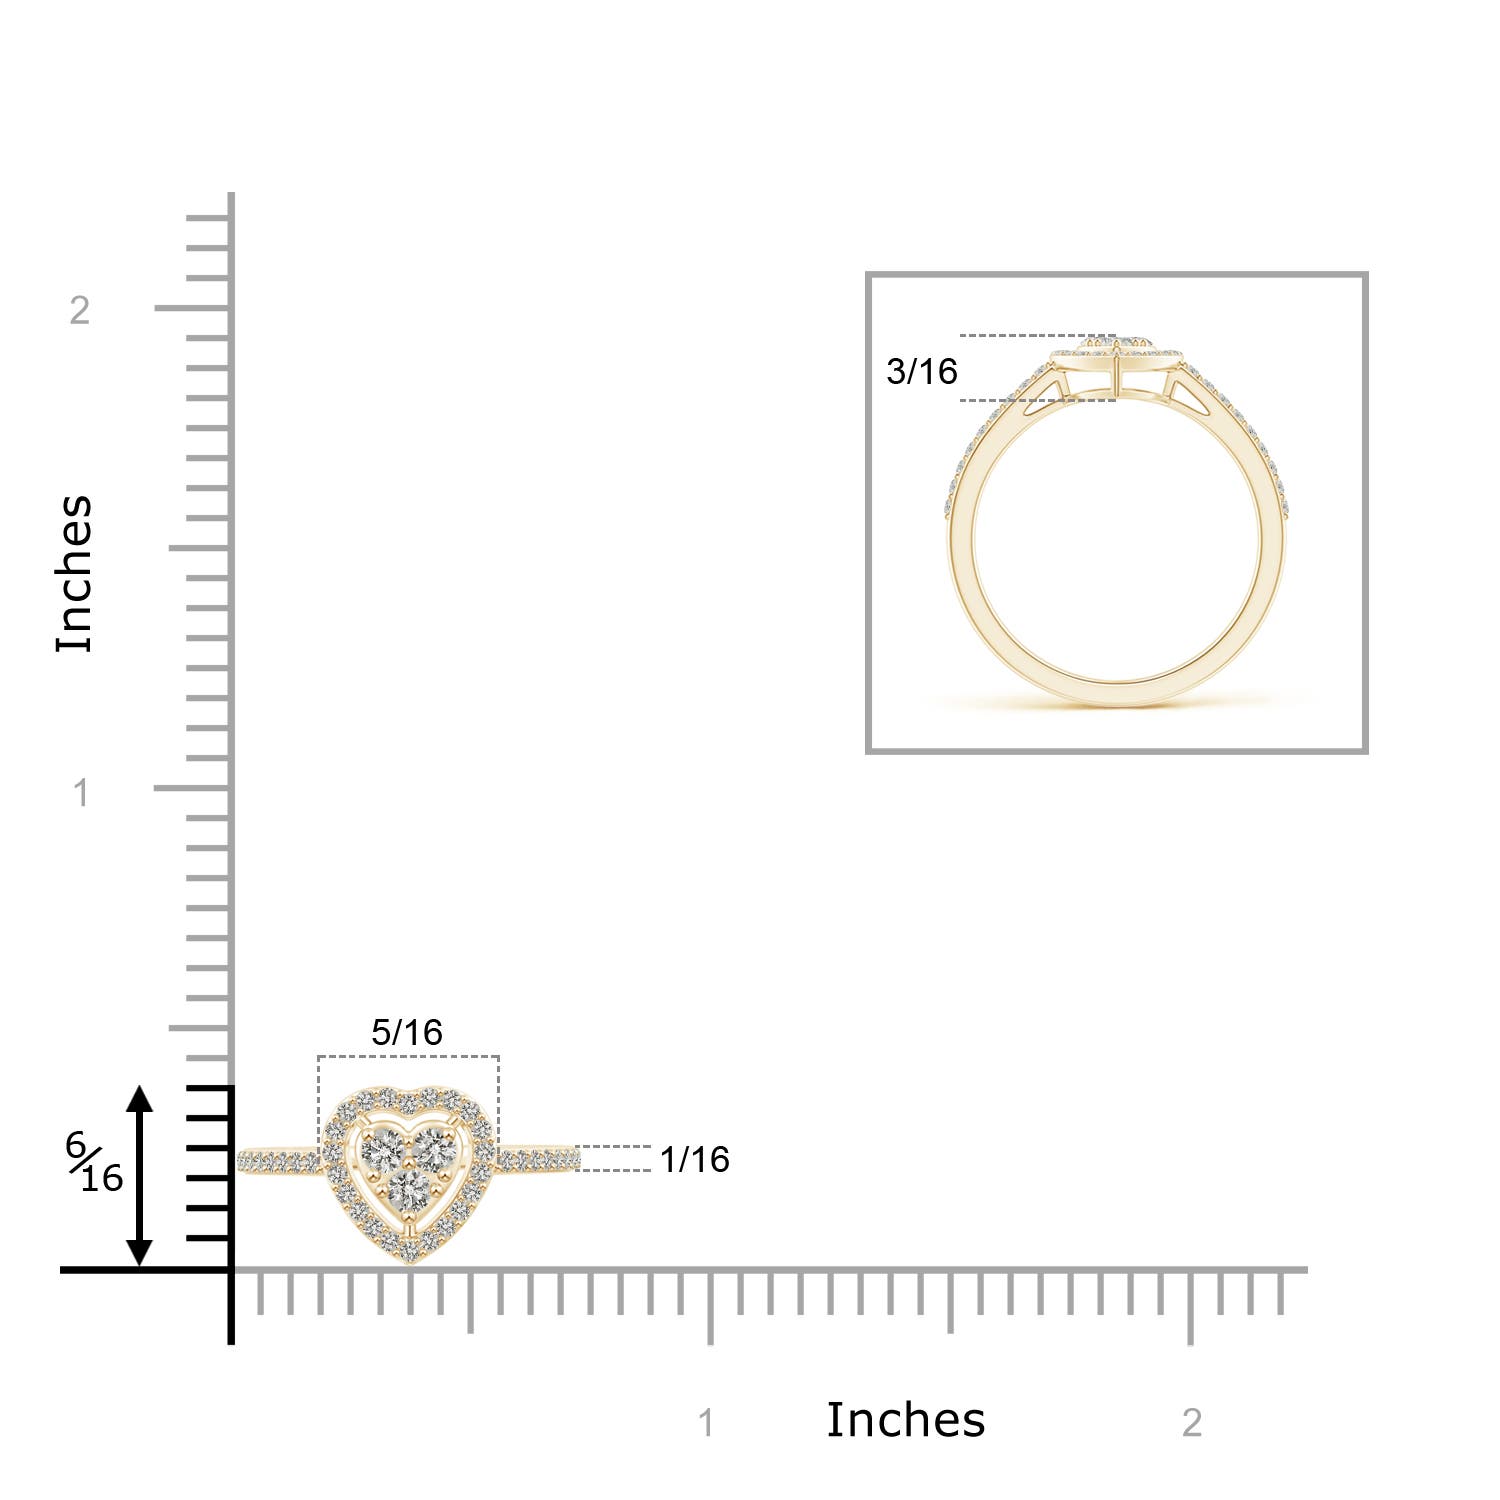 K, I3 / 0.32 CT / 14 KT Yellow Gold